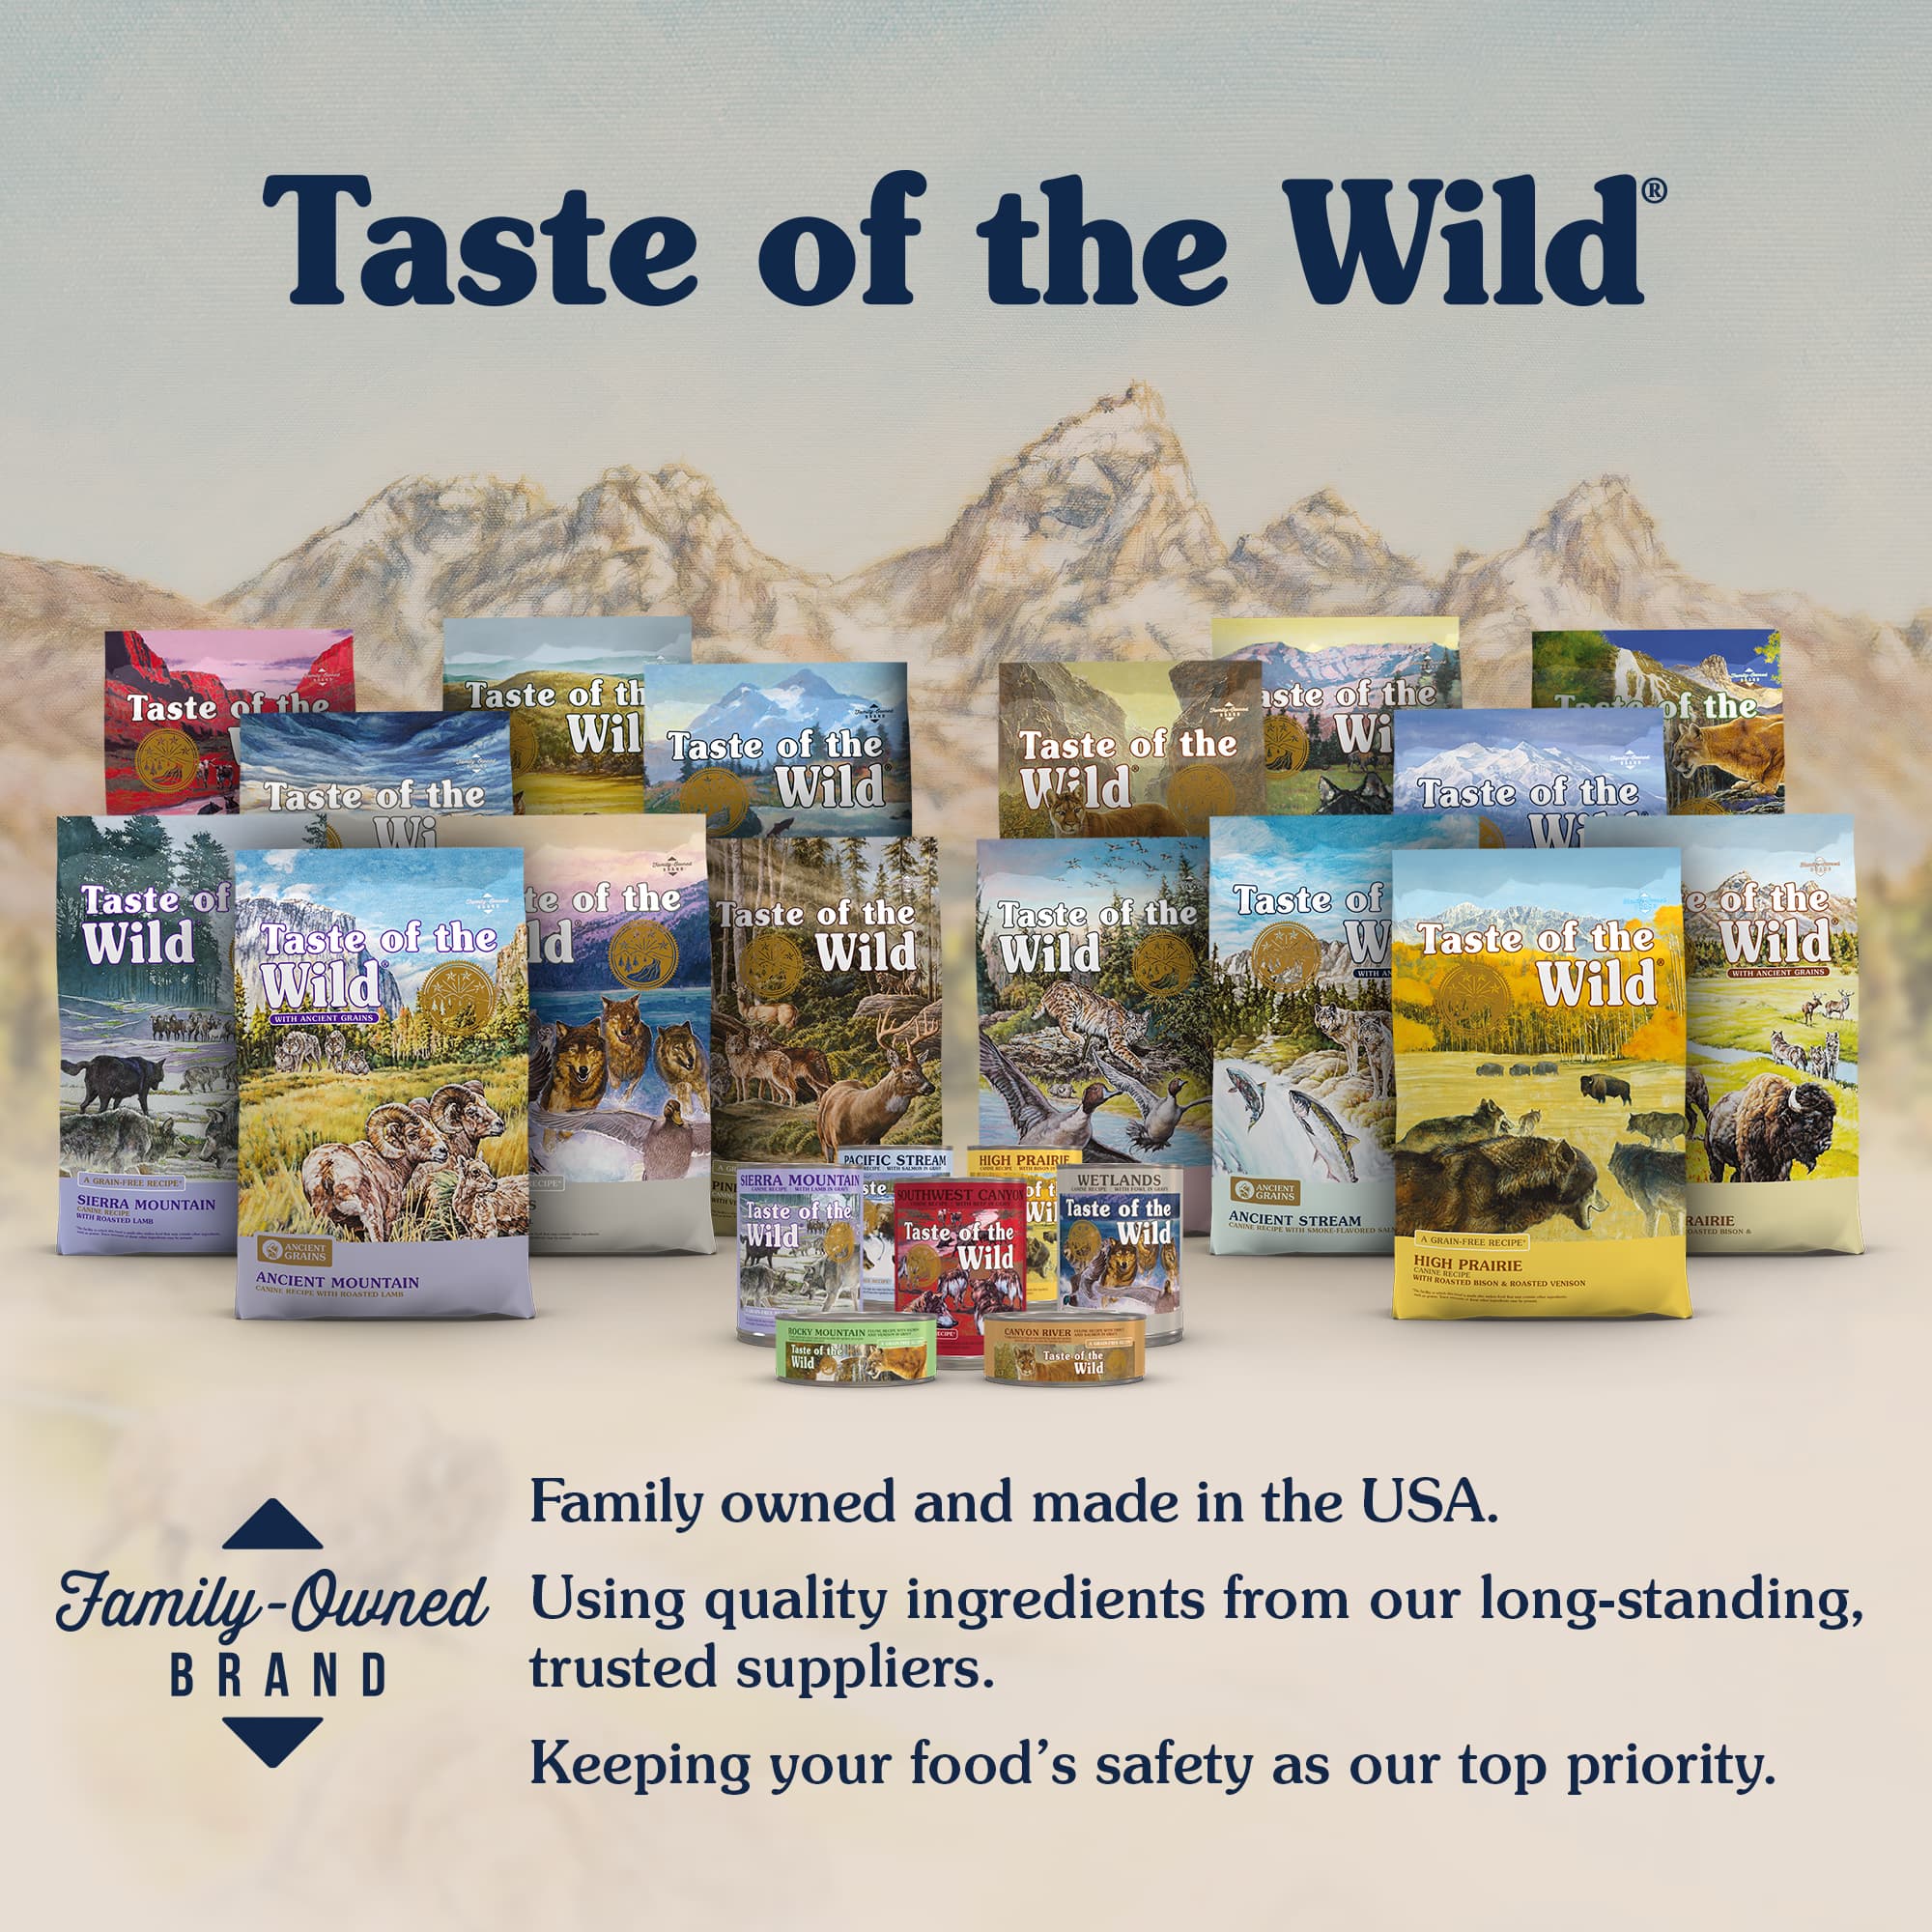 Assorted bags and cans of Taste of the Wild Pet Food products.